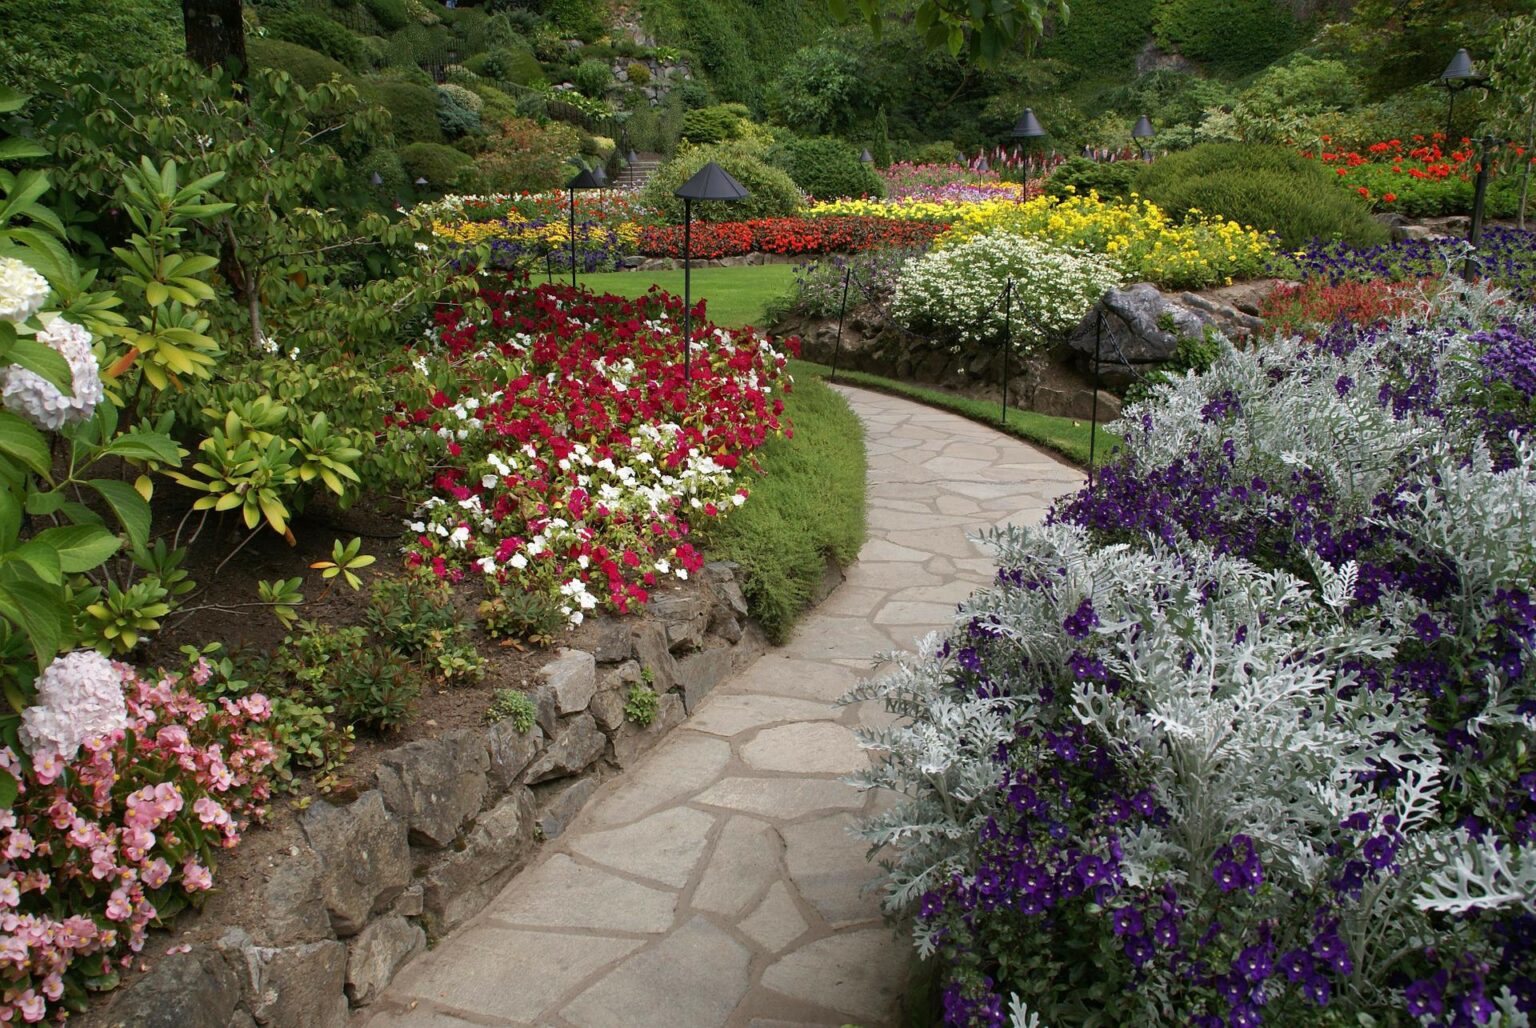 Curved garden path surrounded by flower beds